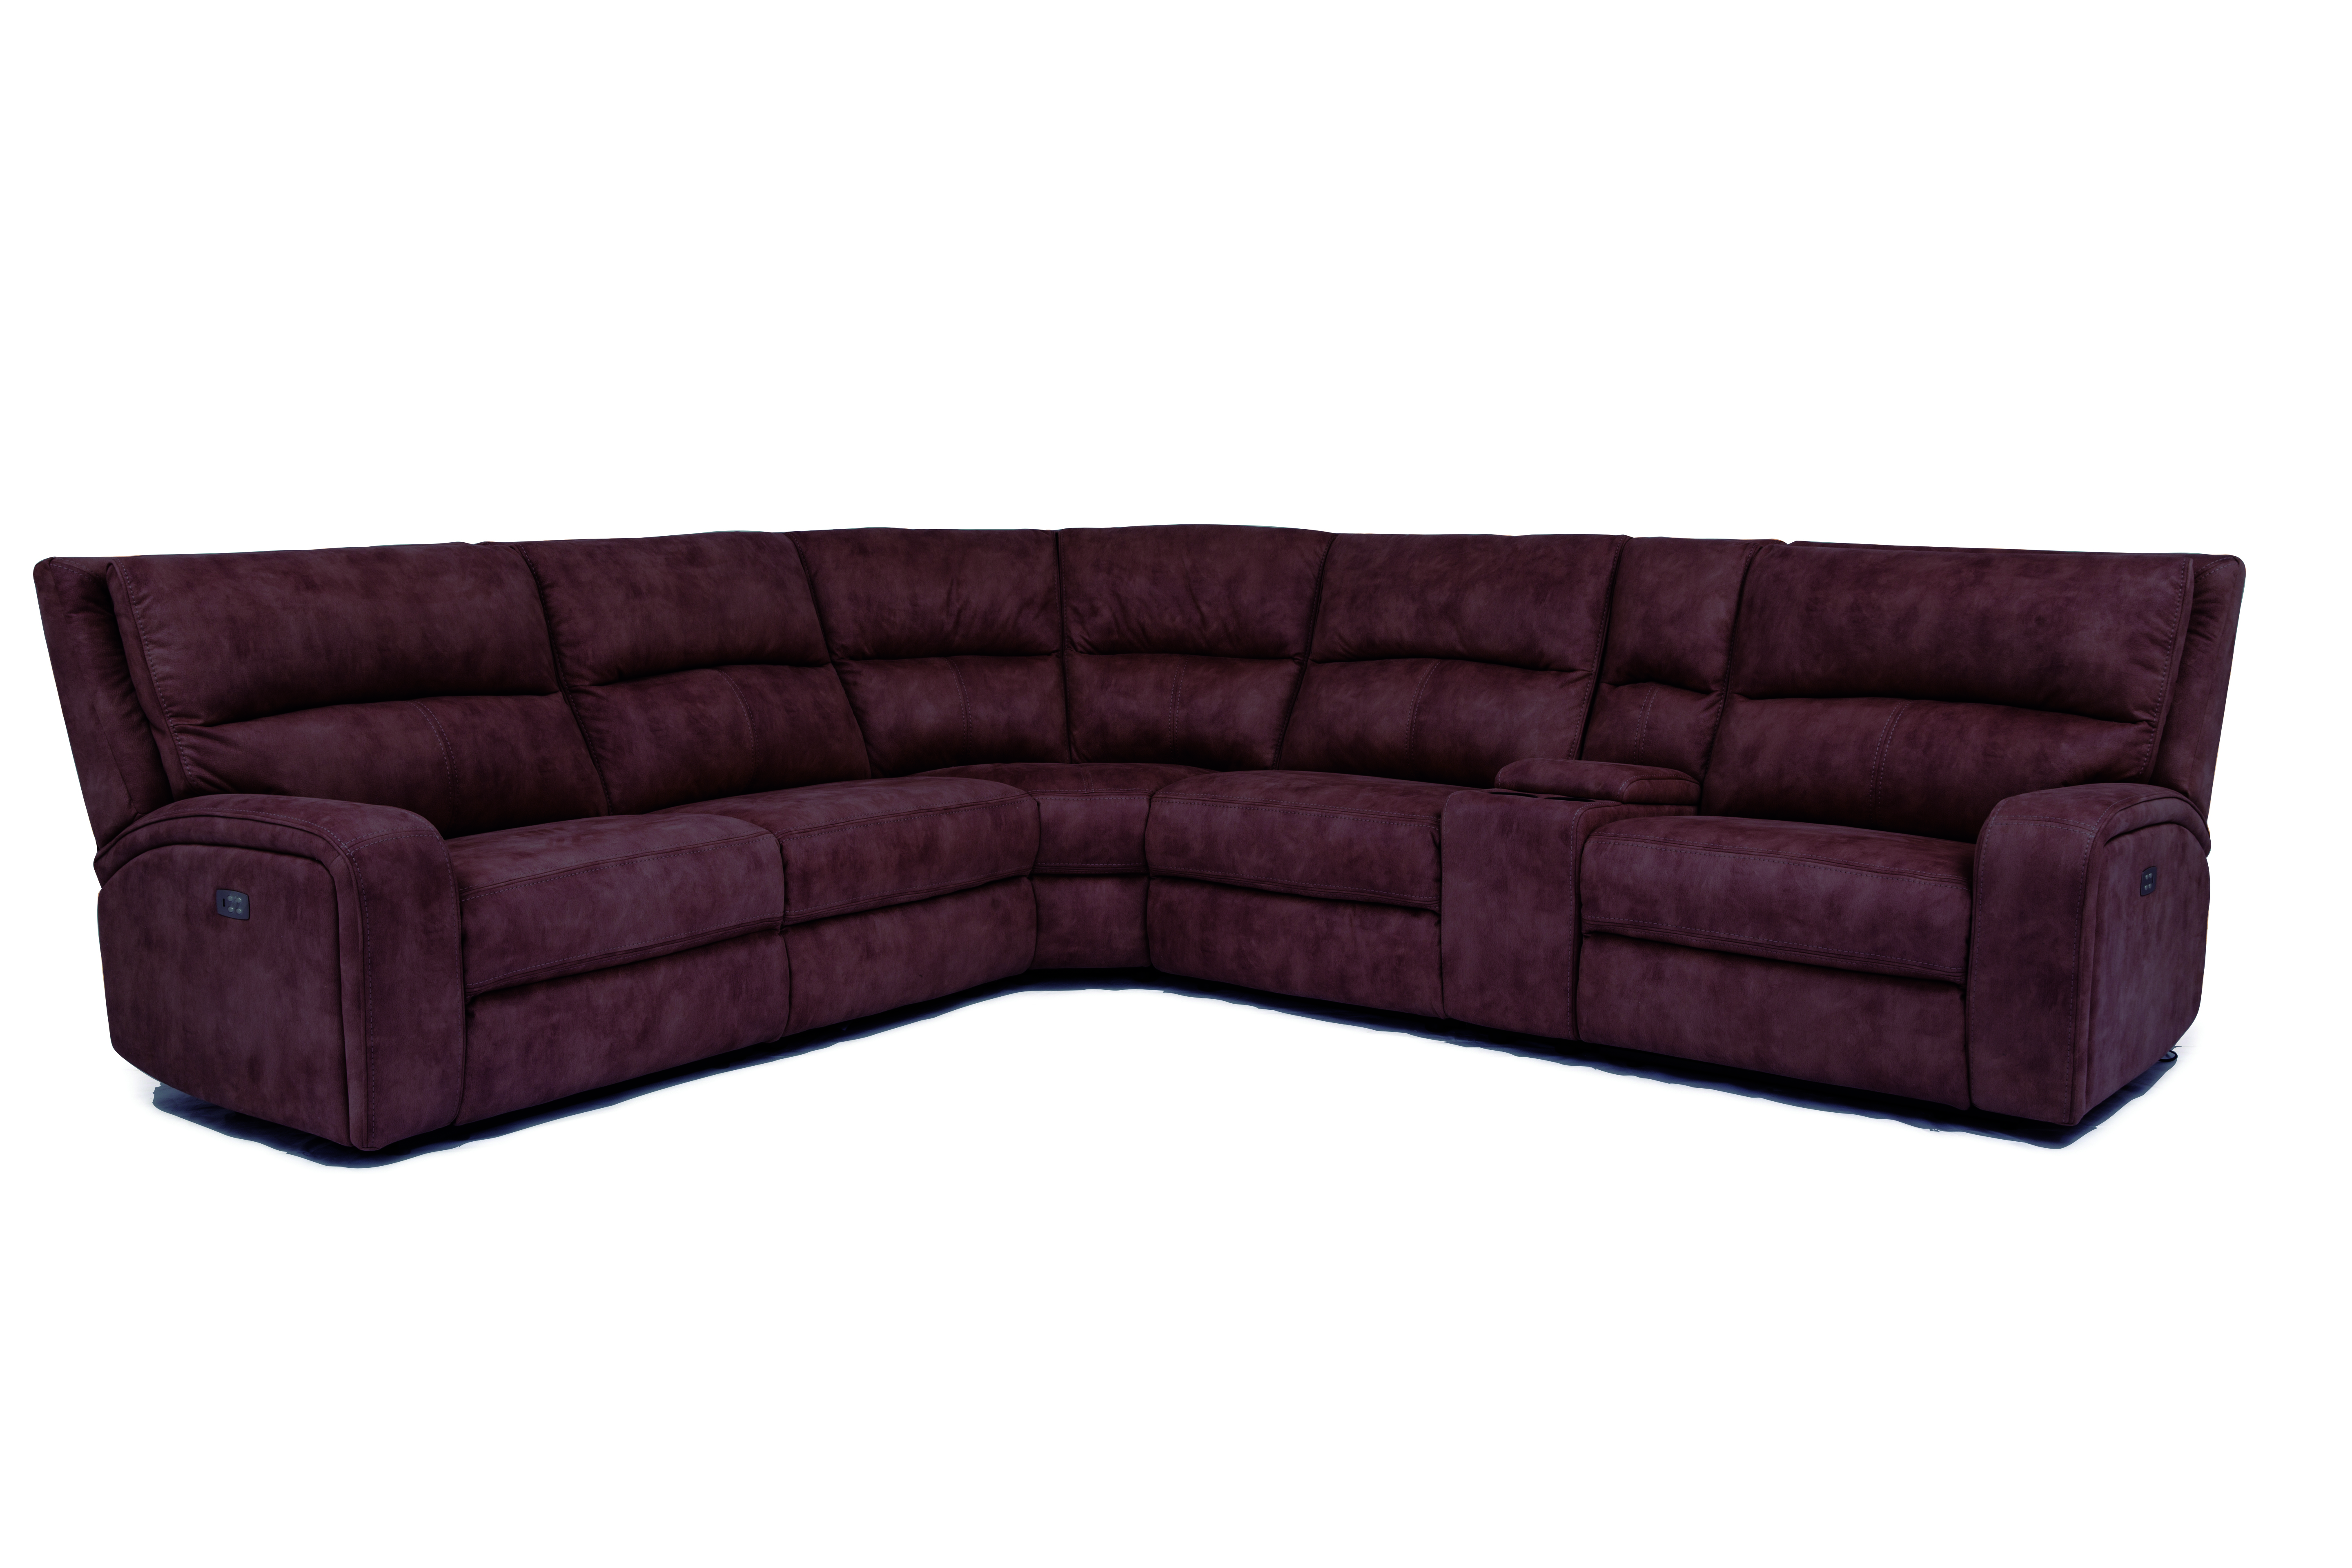 Manwah Power Reclining Sectional with Power Headrest